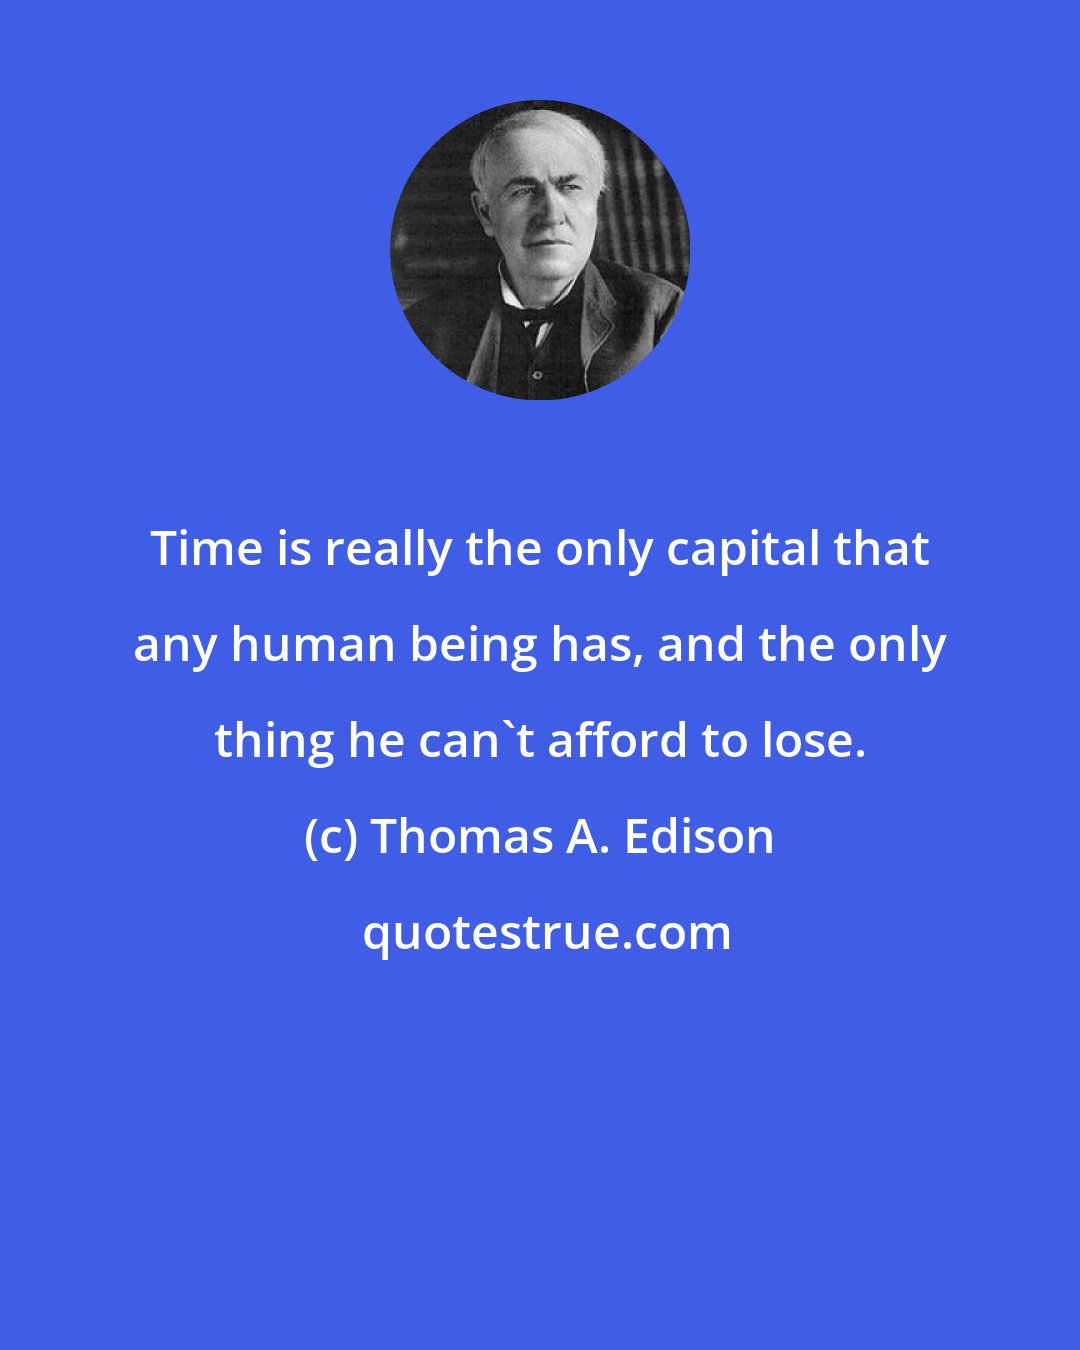 Thomas A. Edison: Time is really the only capital that any human being has, and the only thing he can't afford to lose.